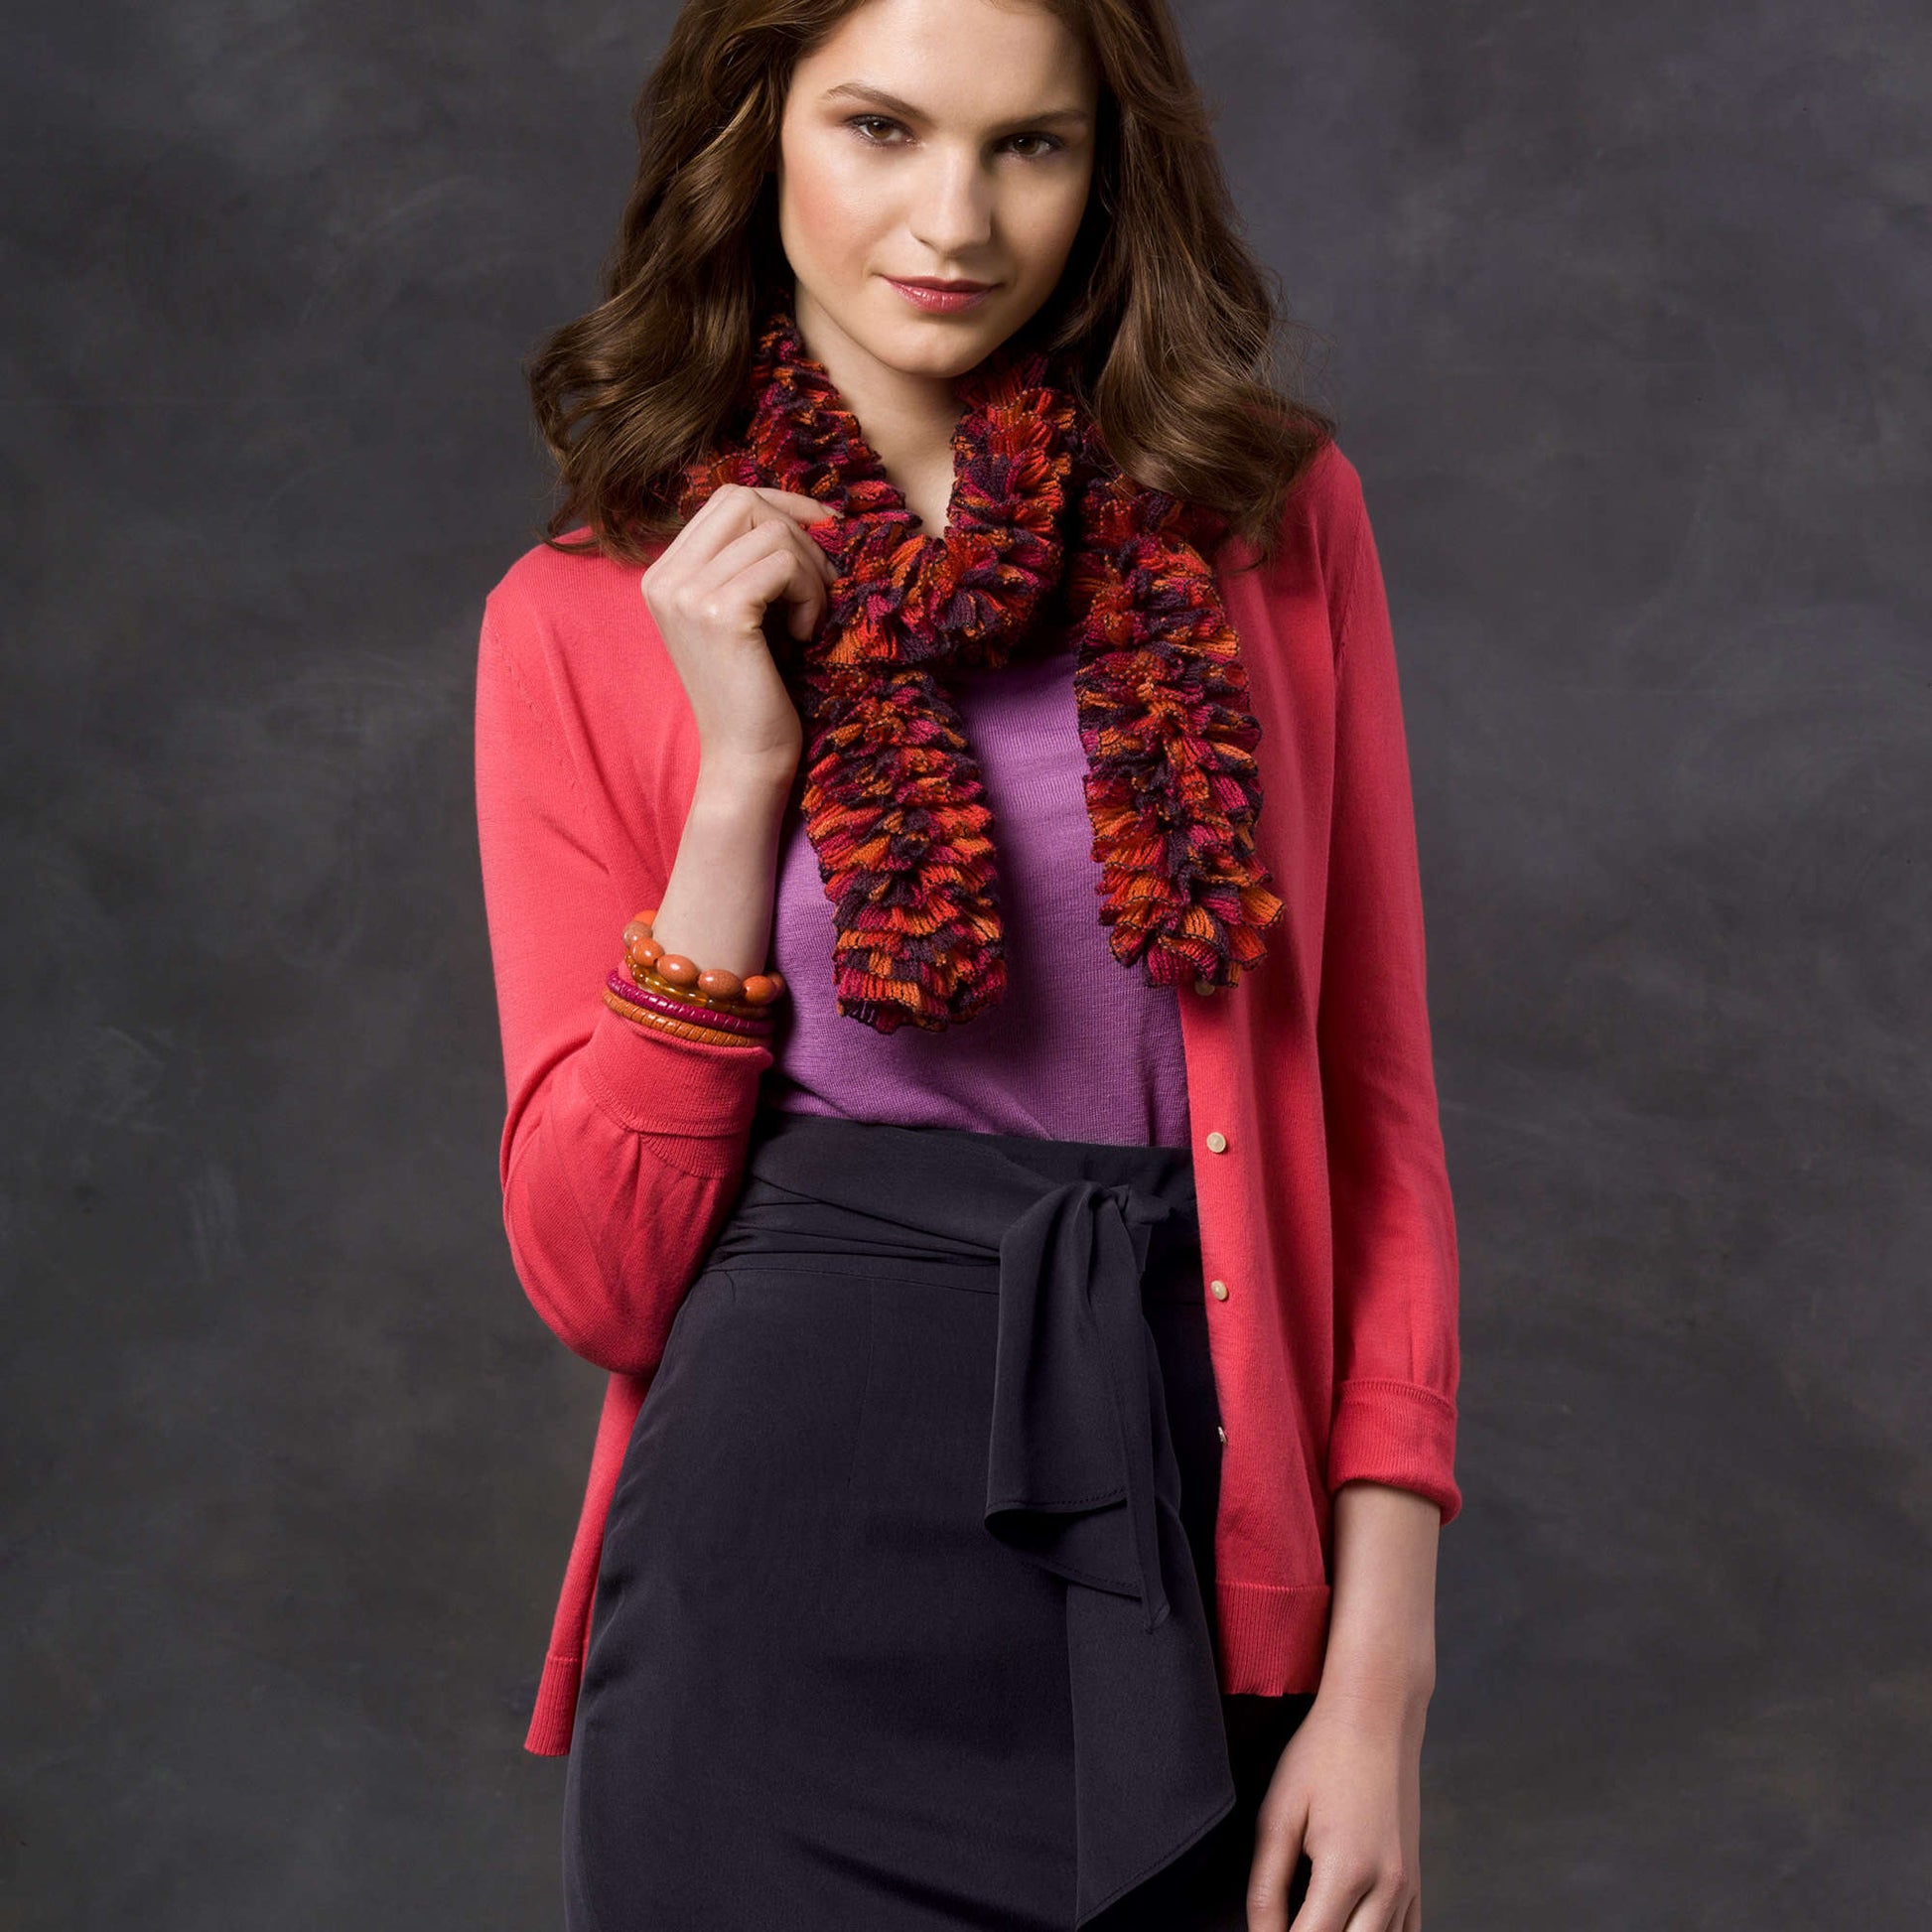 Free Red Heart Victoria's Knit Scarf Pattern